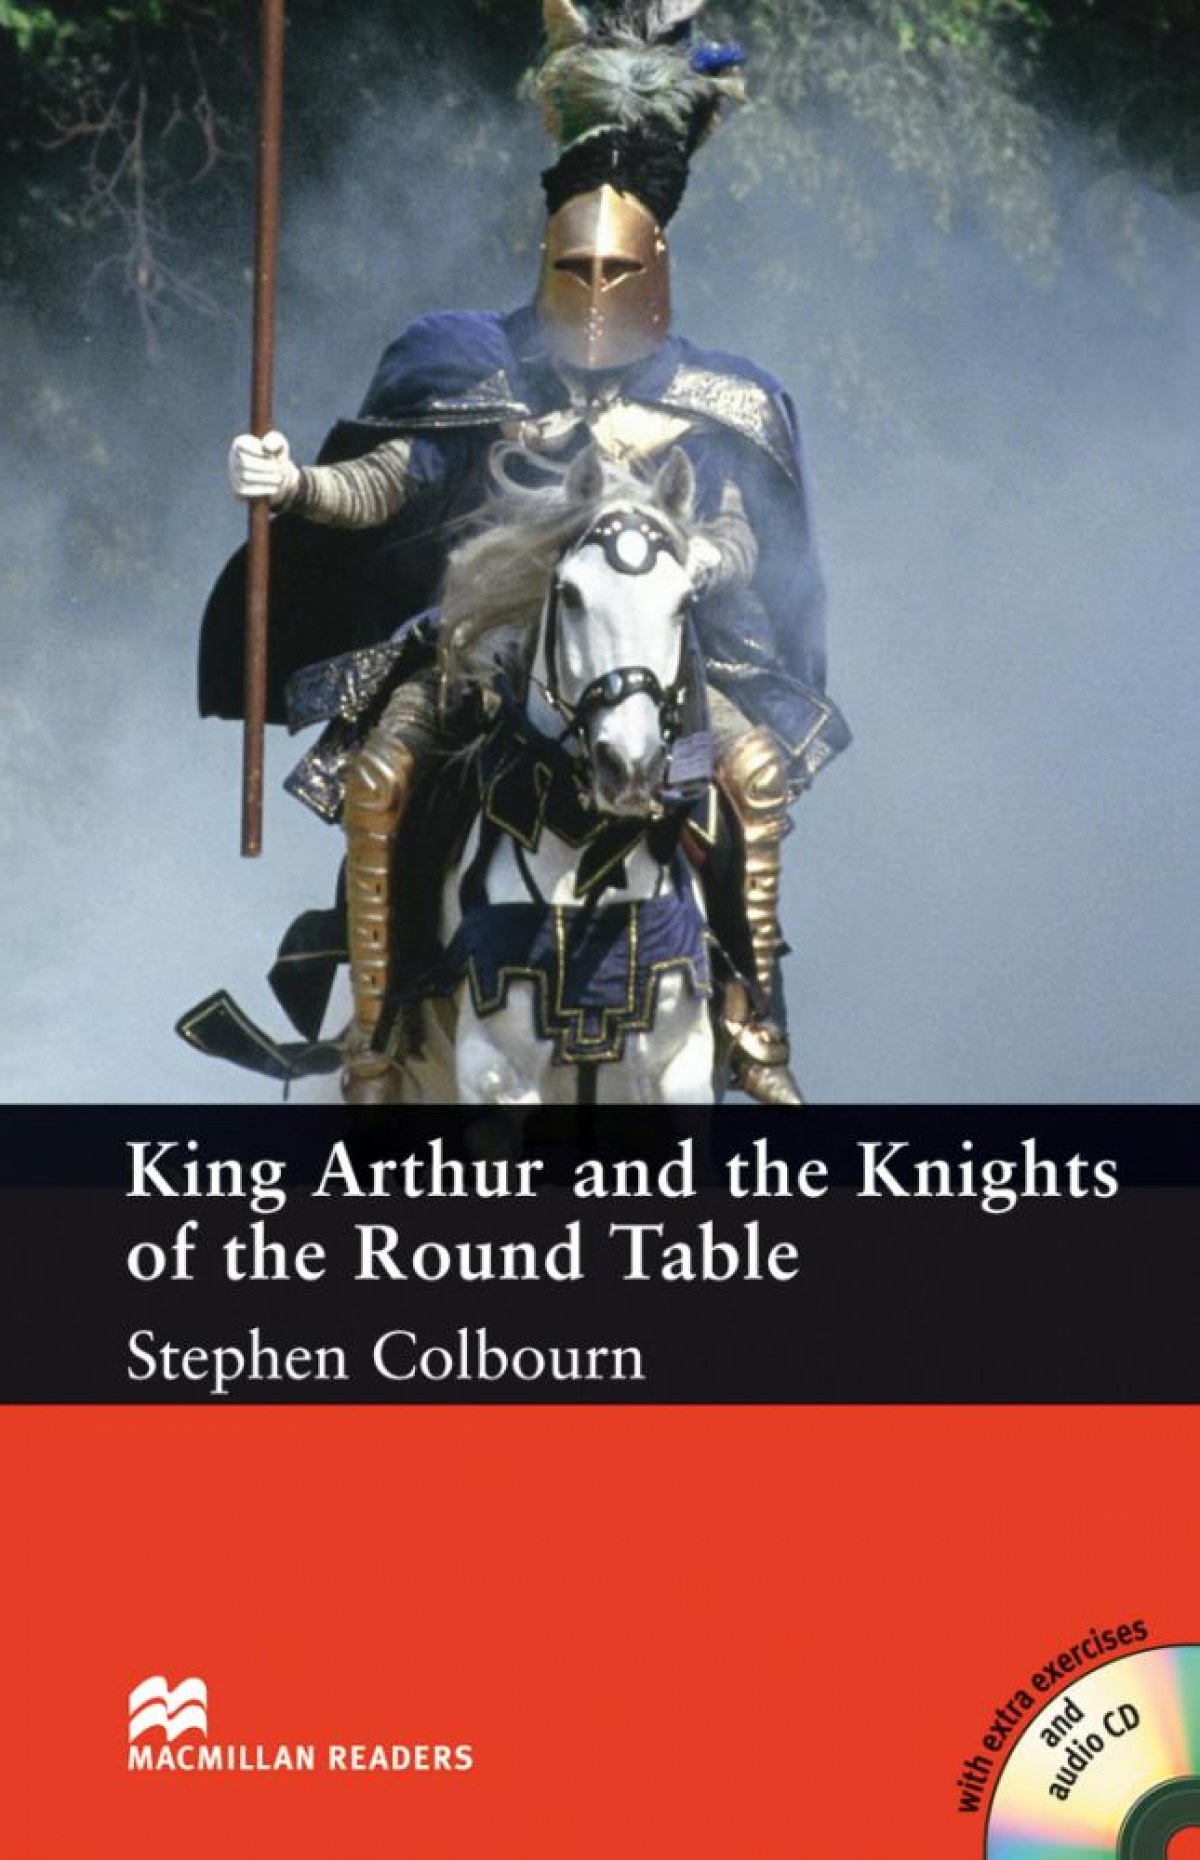 King arthur and the knights of the round table - Colbourn Stephen